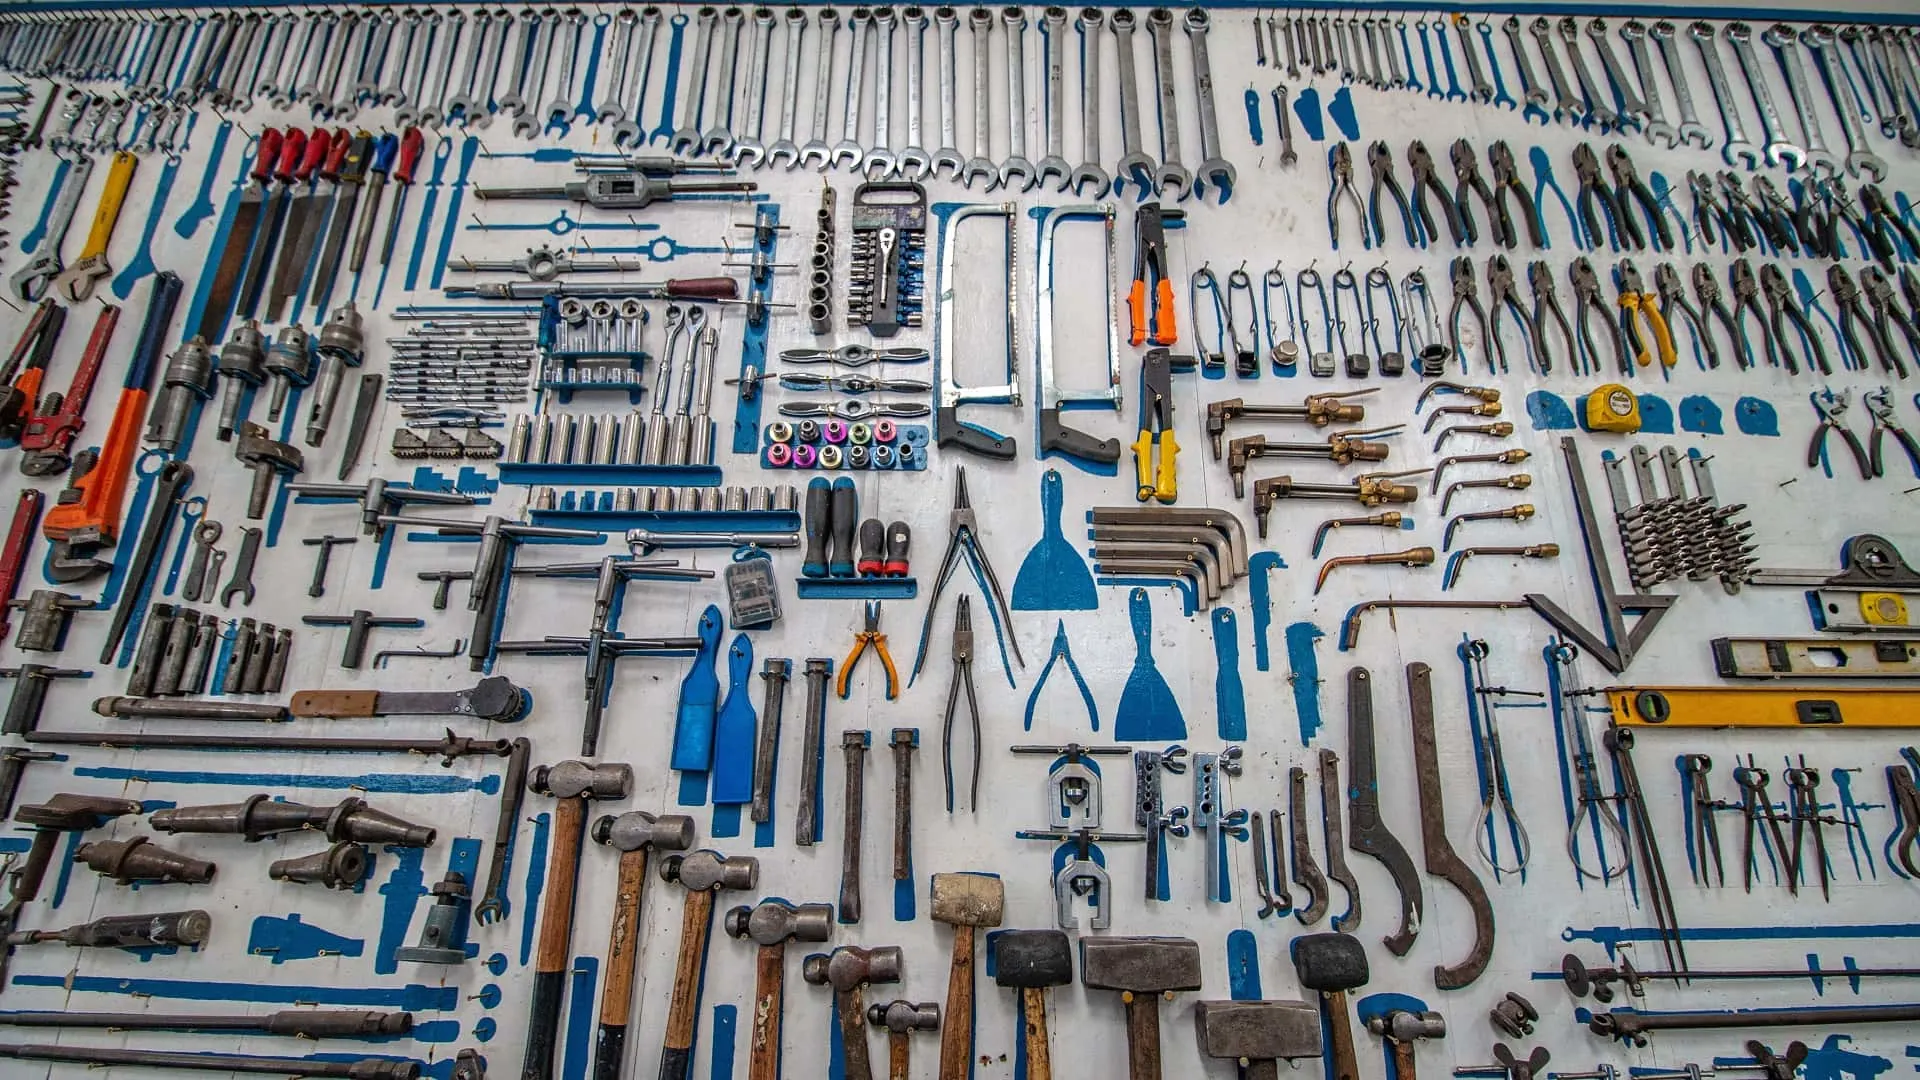 Too many tools are heavy and unnecessary. A basic RV tool kit is all you need.